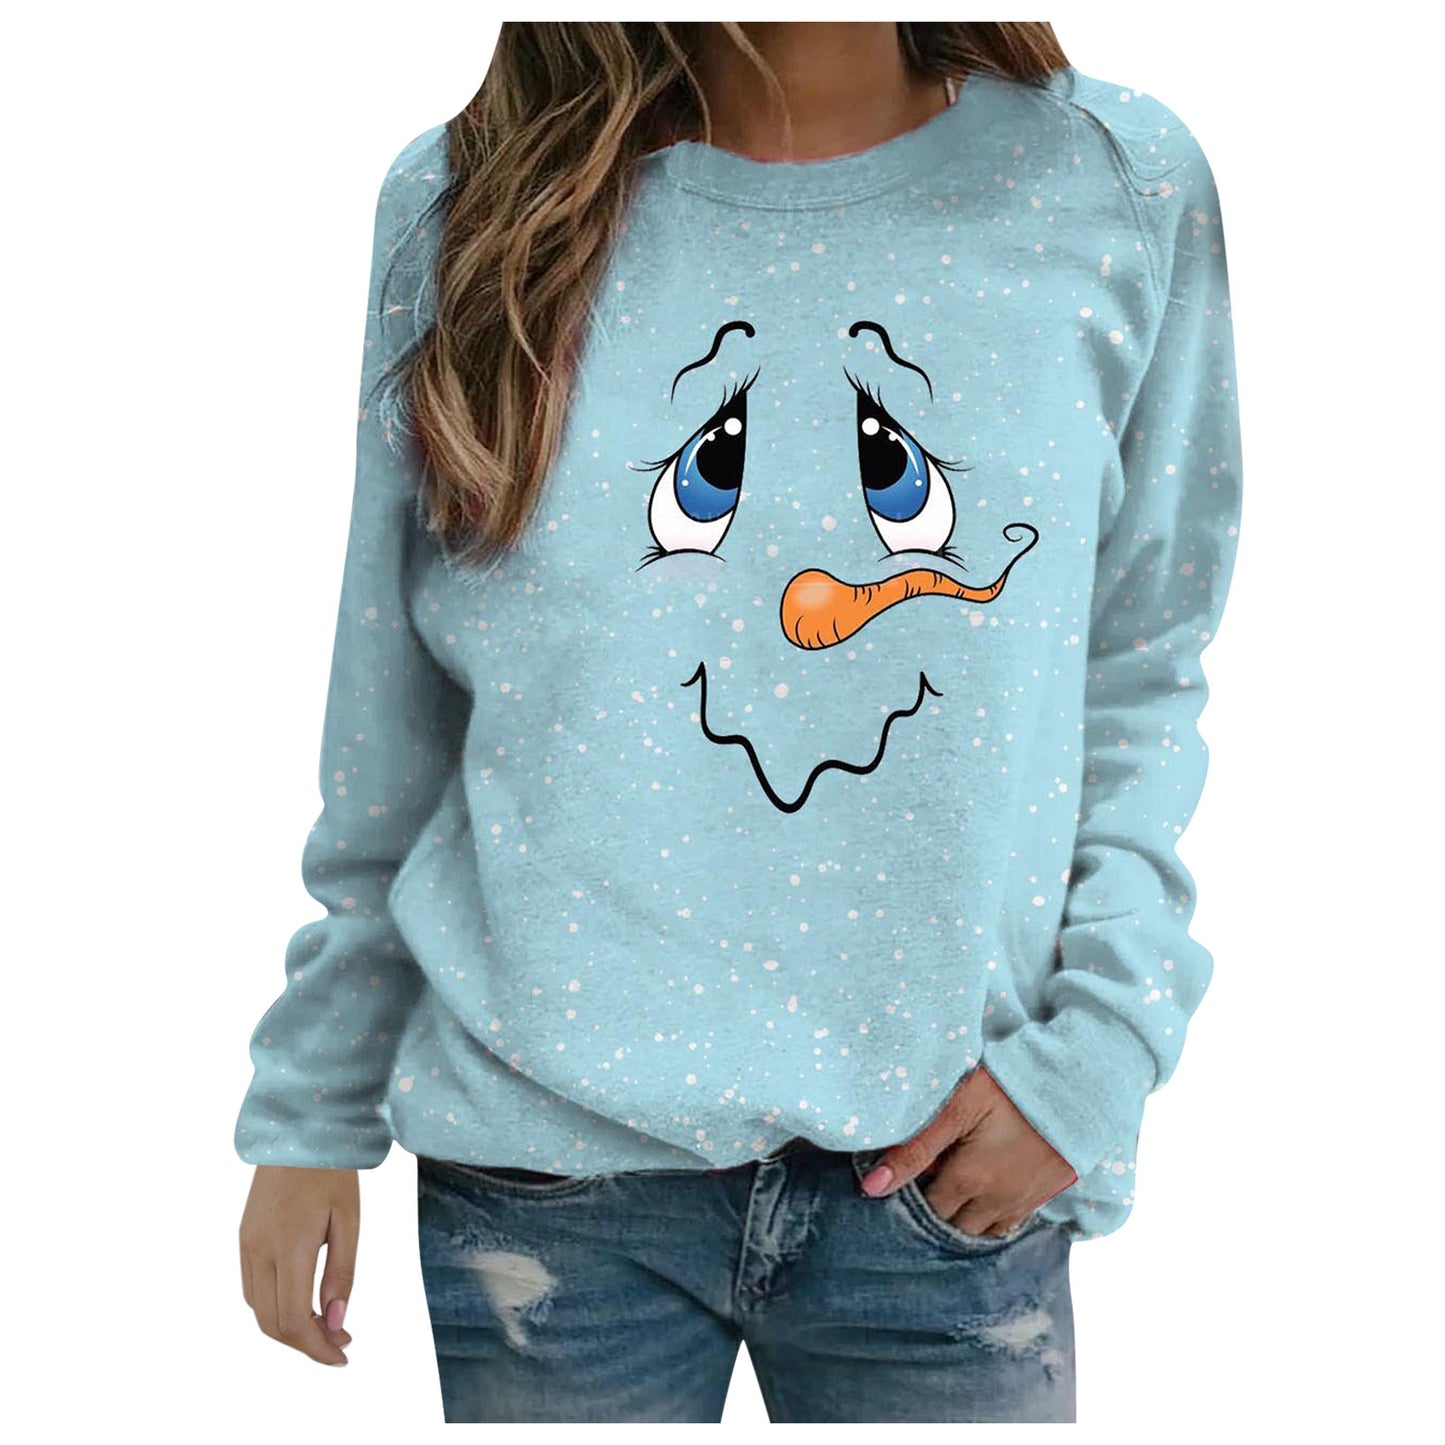 Christmas Sweater Coat Autumn And Winter Women's Clothing